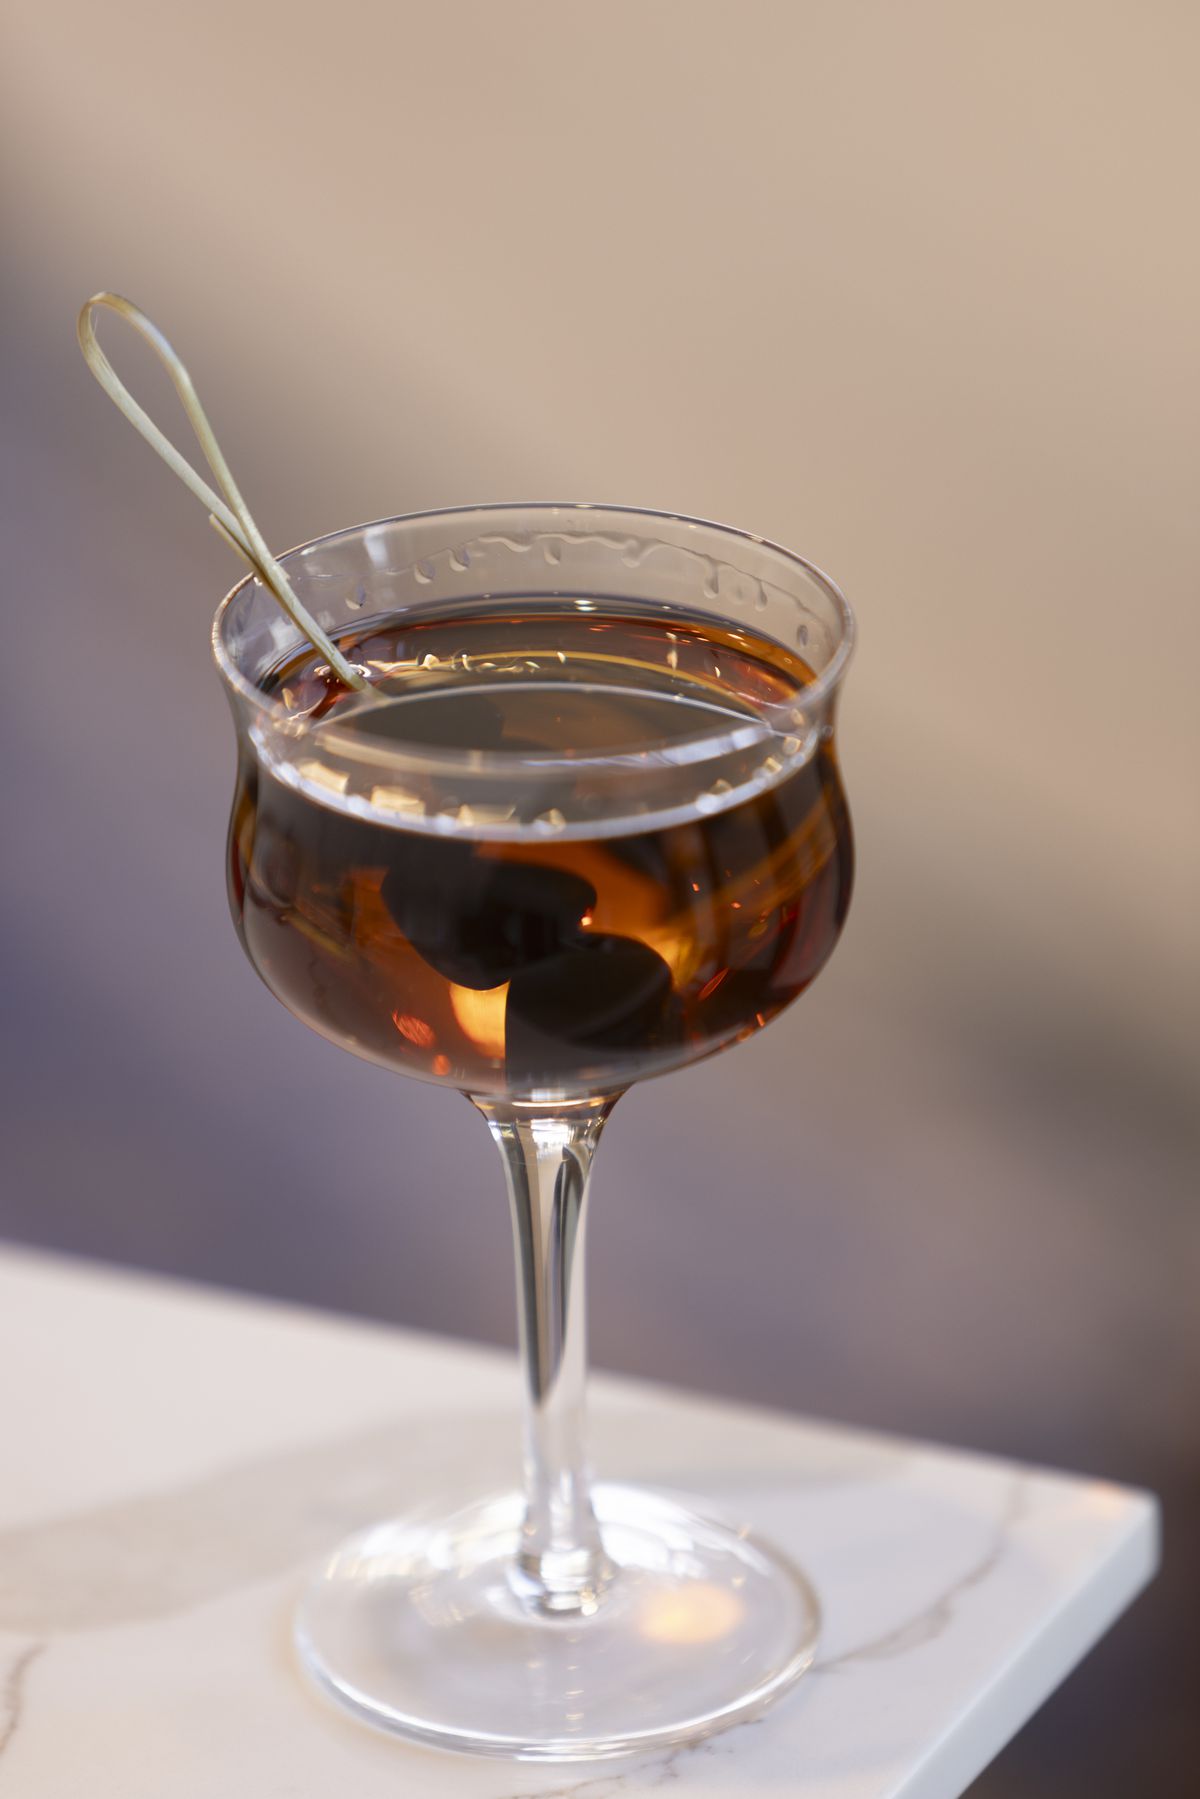 A brown cocktail in a high stem glass at Alice B. restaurant in Palm Springs, California.